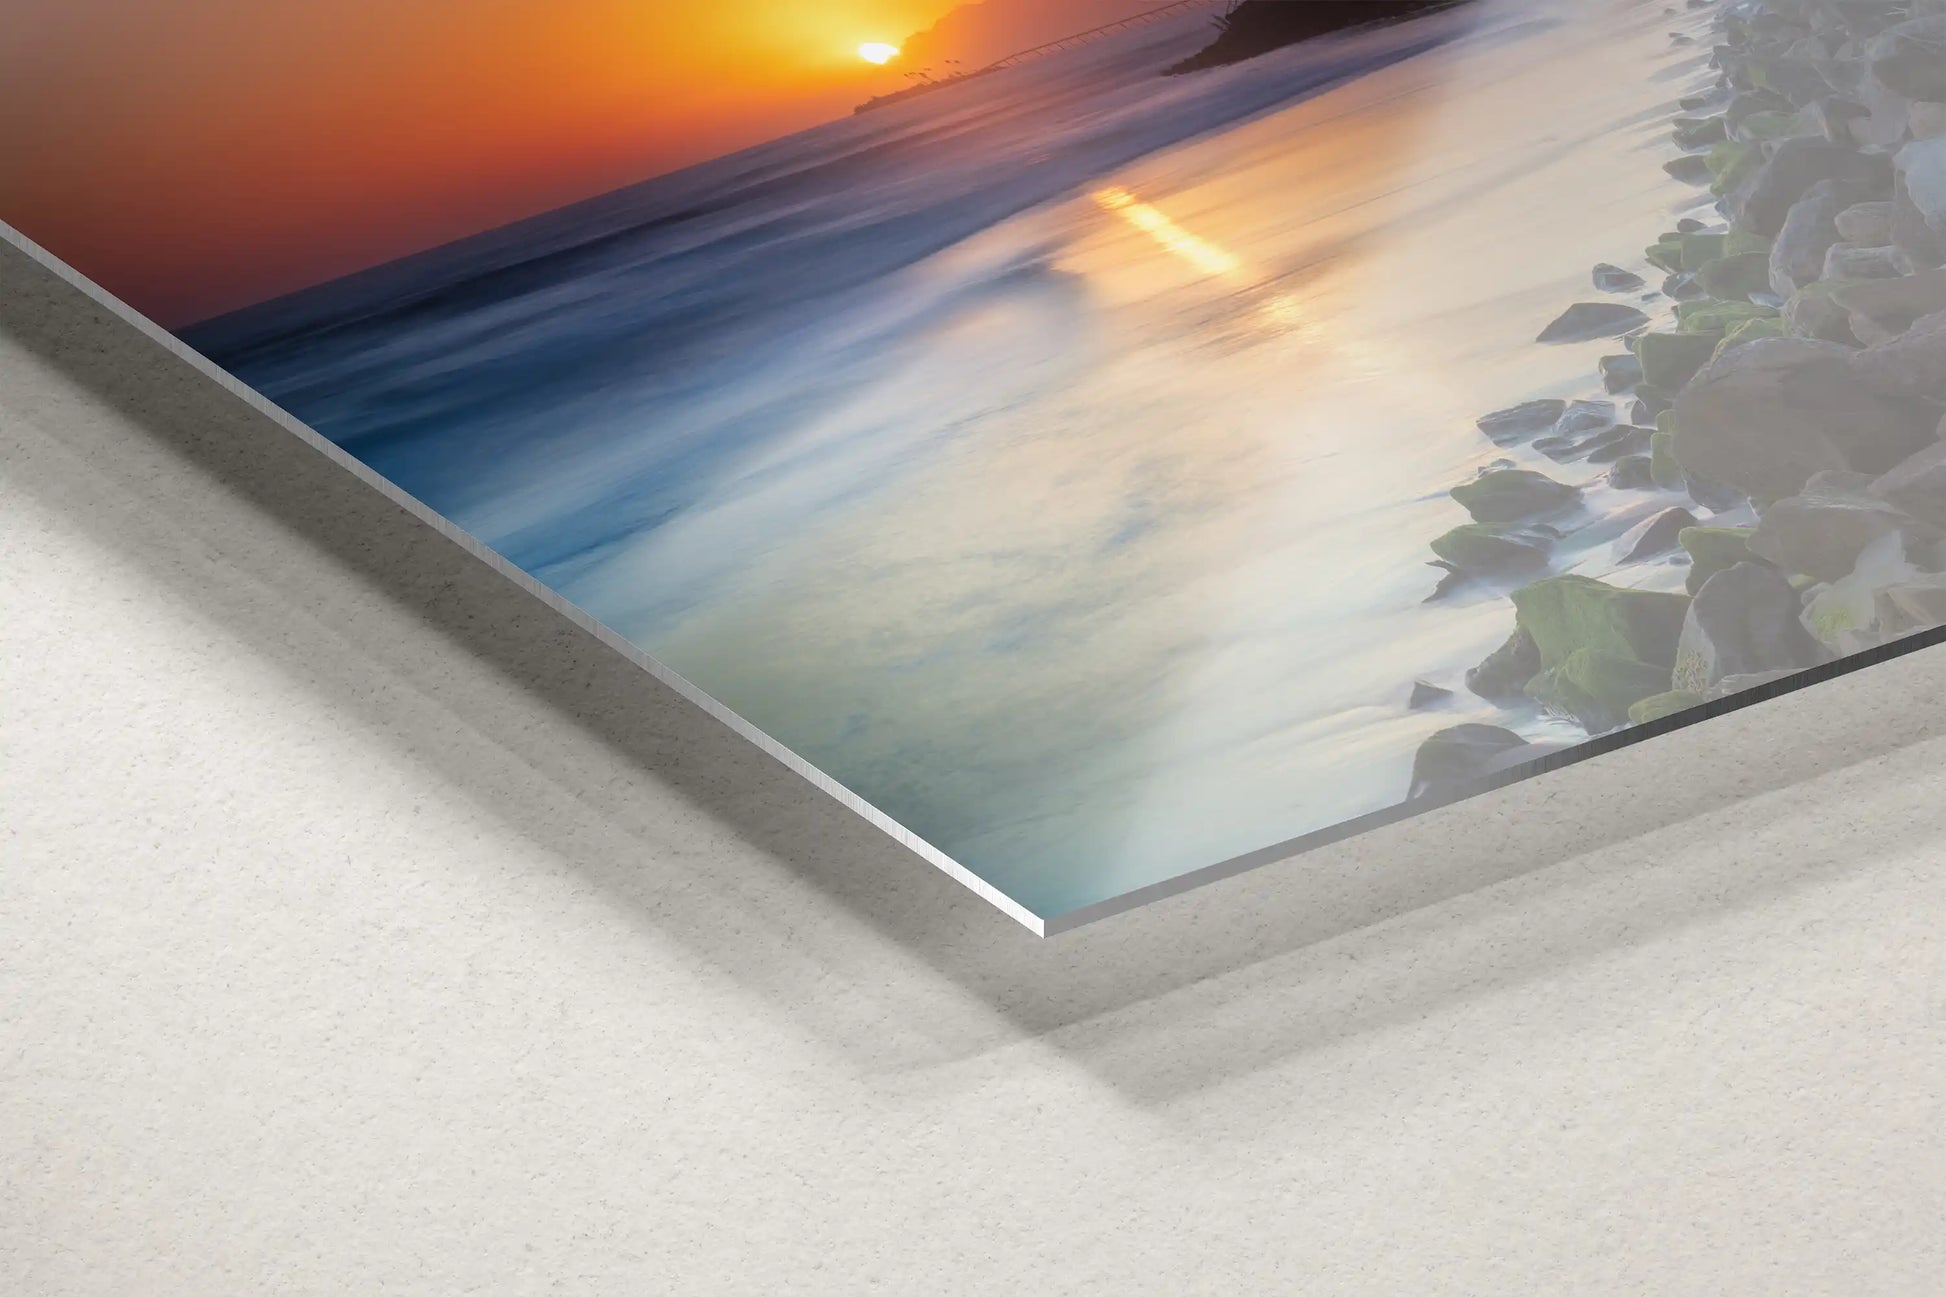 The edge of a metal print depicting Ventura Beach Sunset, with a focus on the texture and reflective quality of the material.